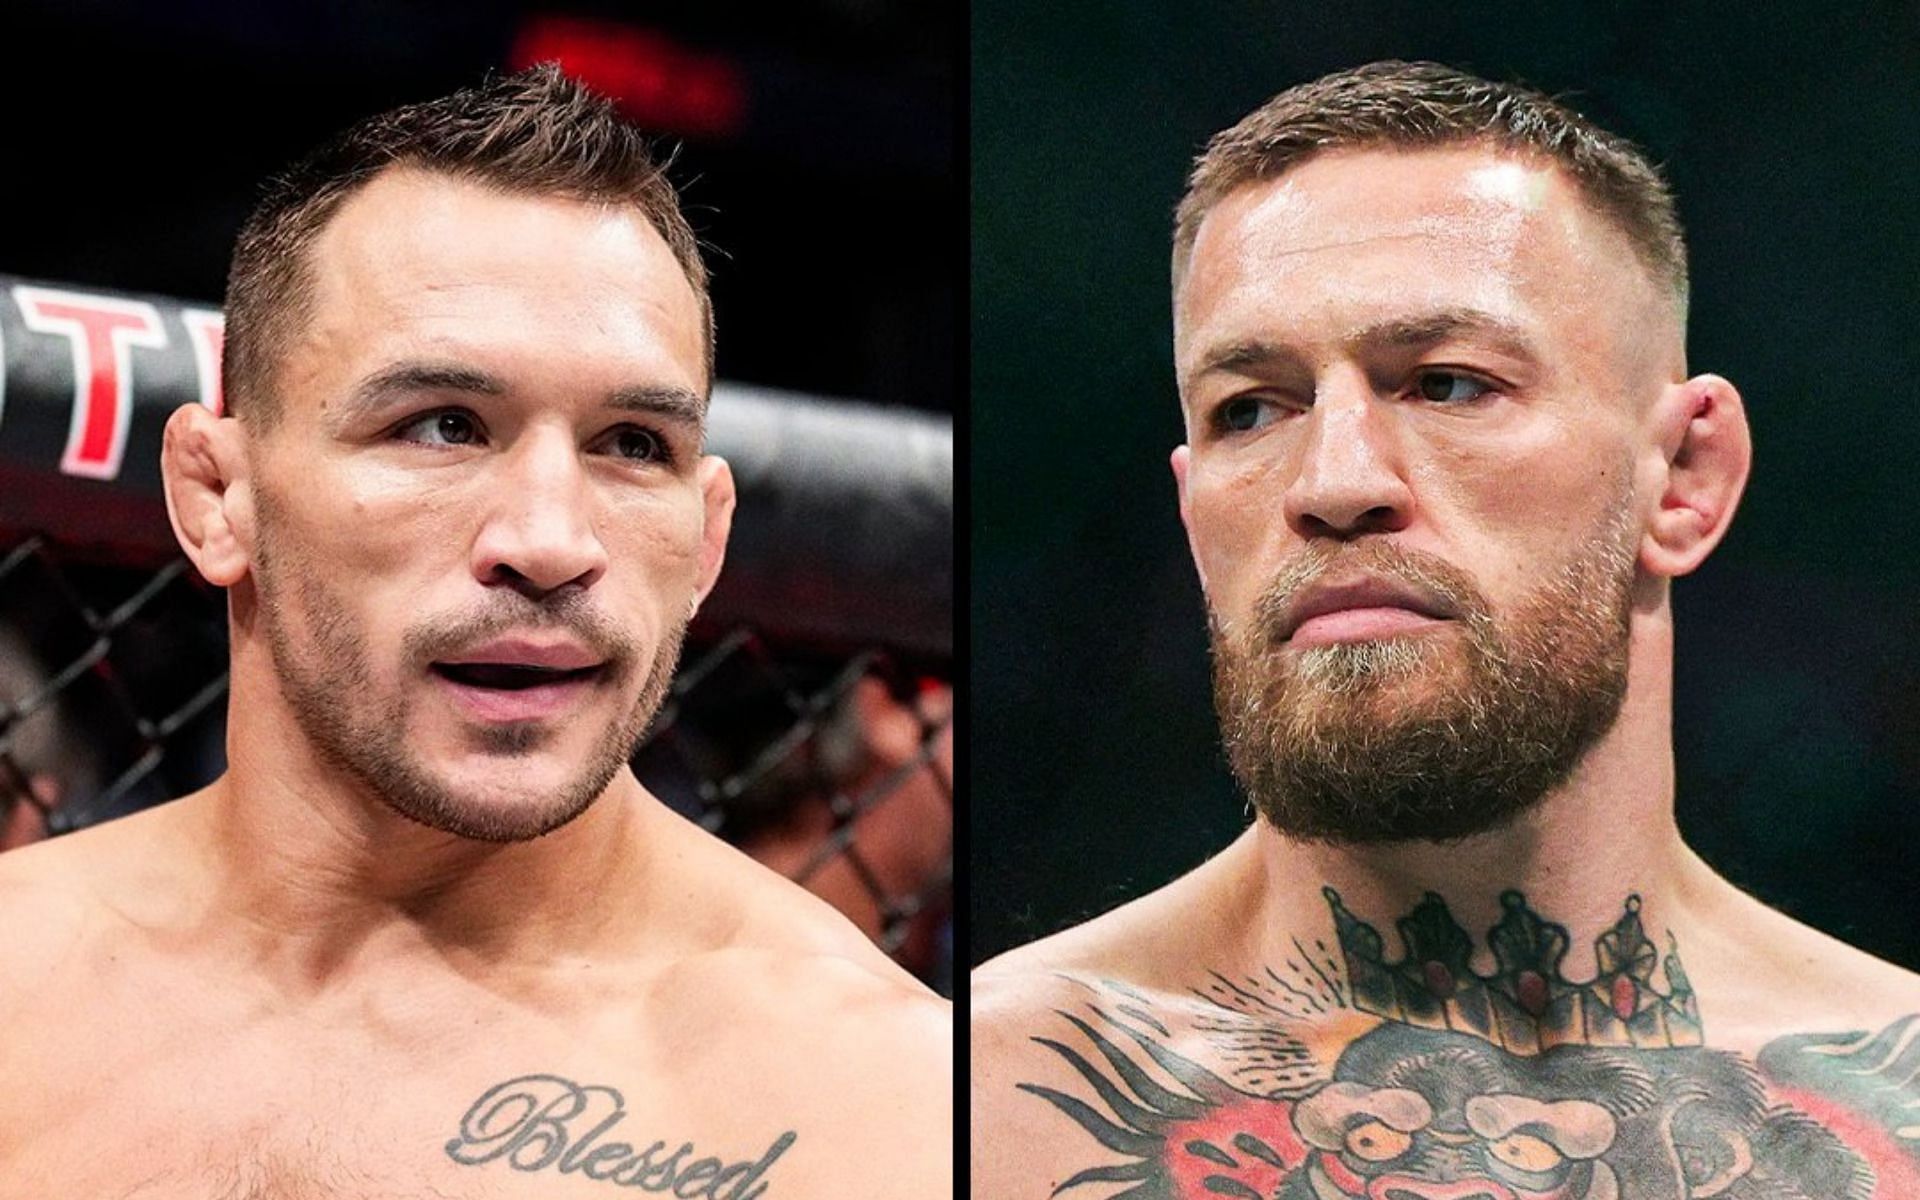 Michael Chandler (left) and Conor McGregor (right) [Image credits: @espnmma on Twitter]